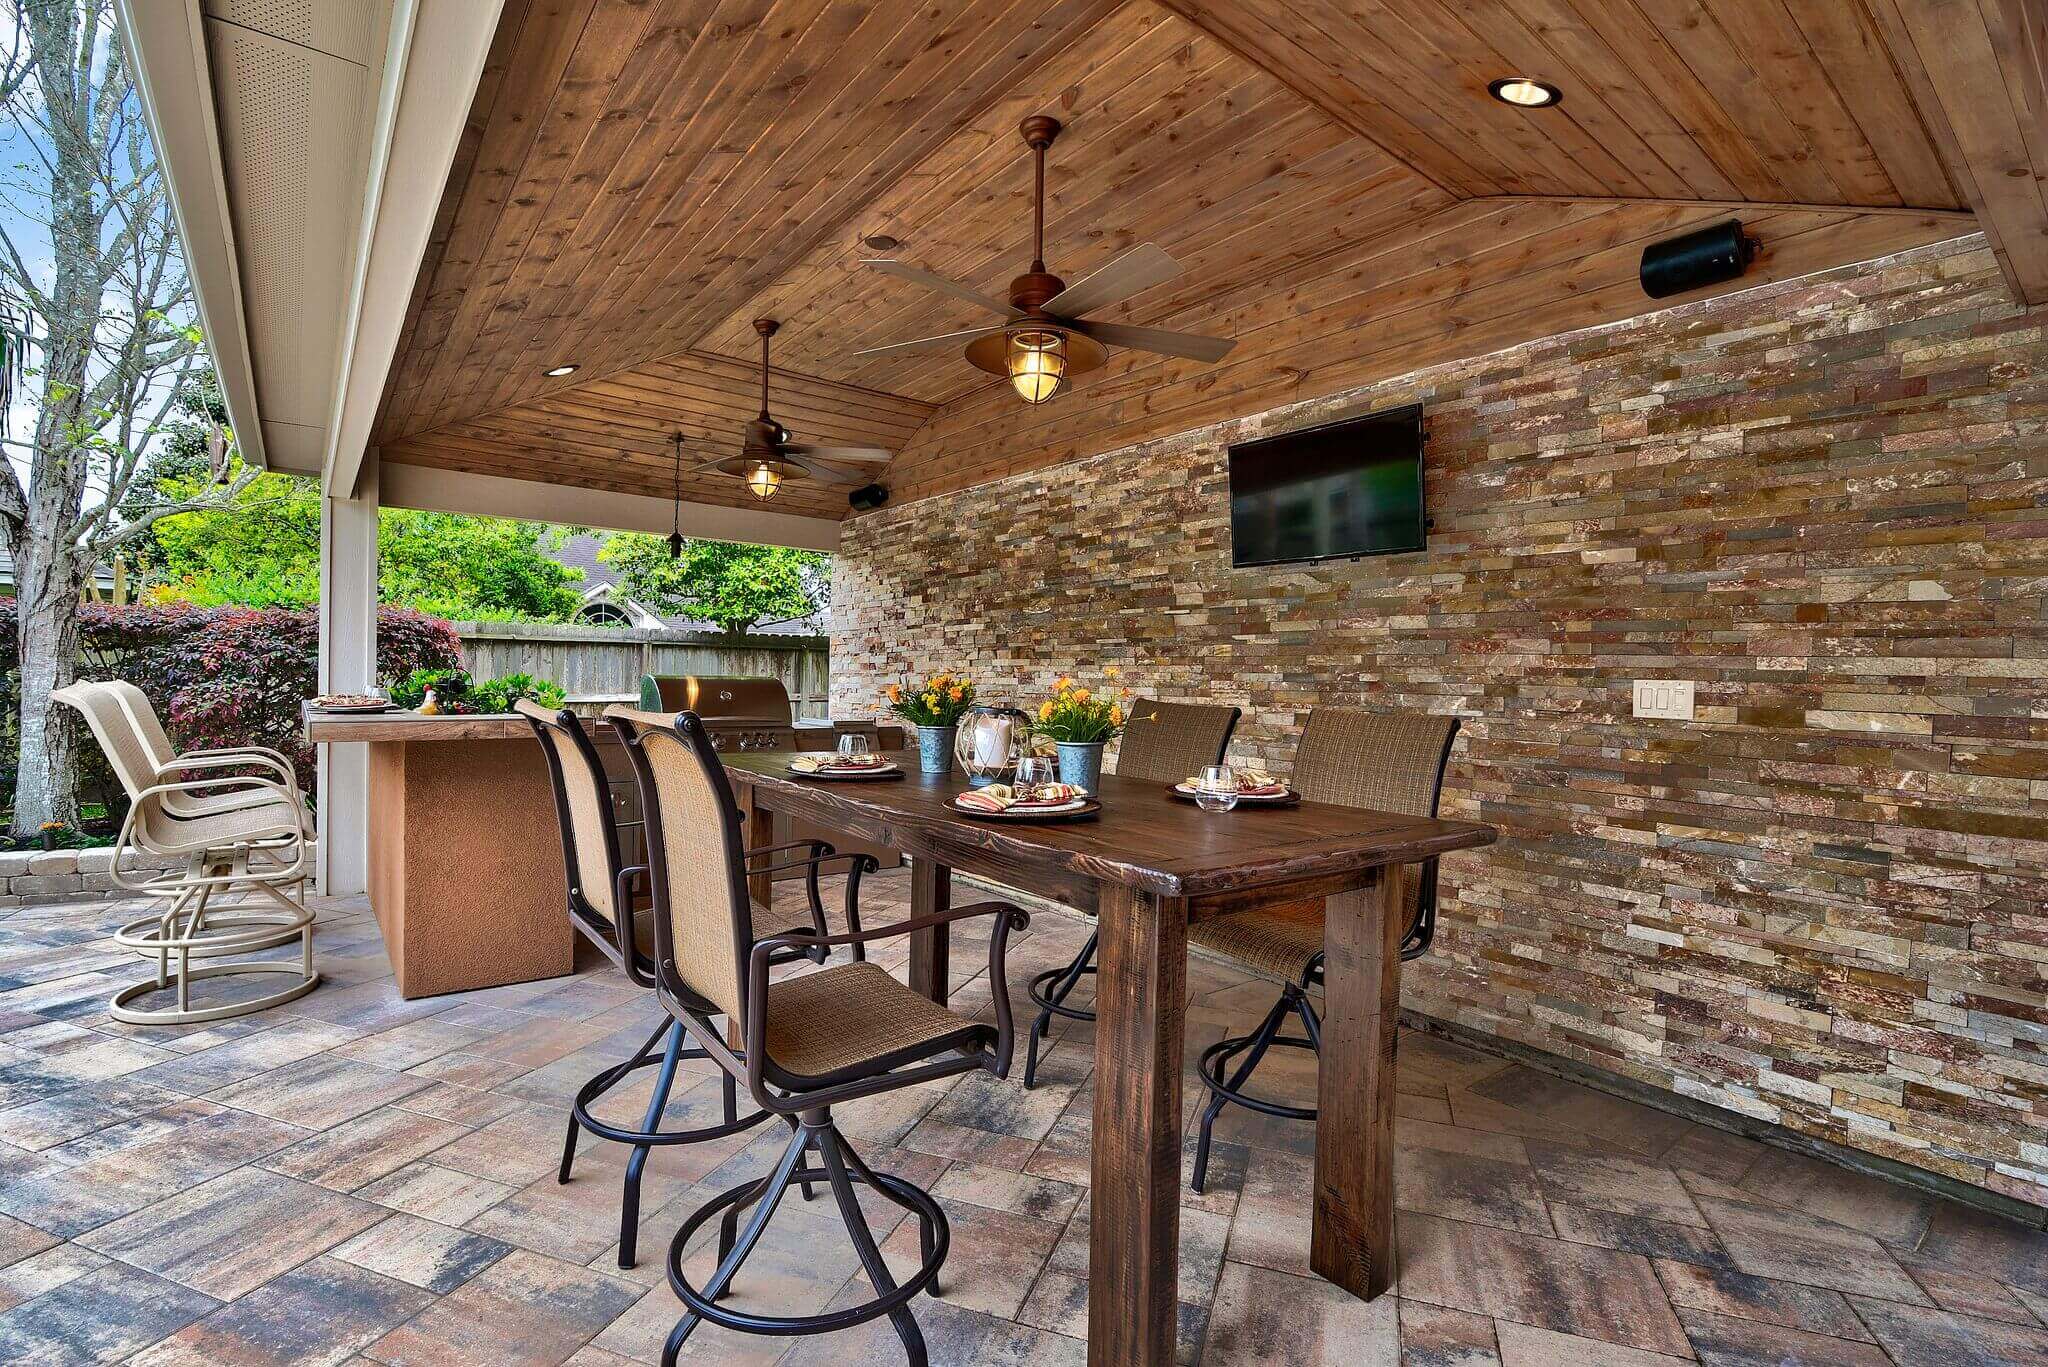 Outdoor kitchen and seating area under a patio cover with tv mount